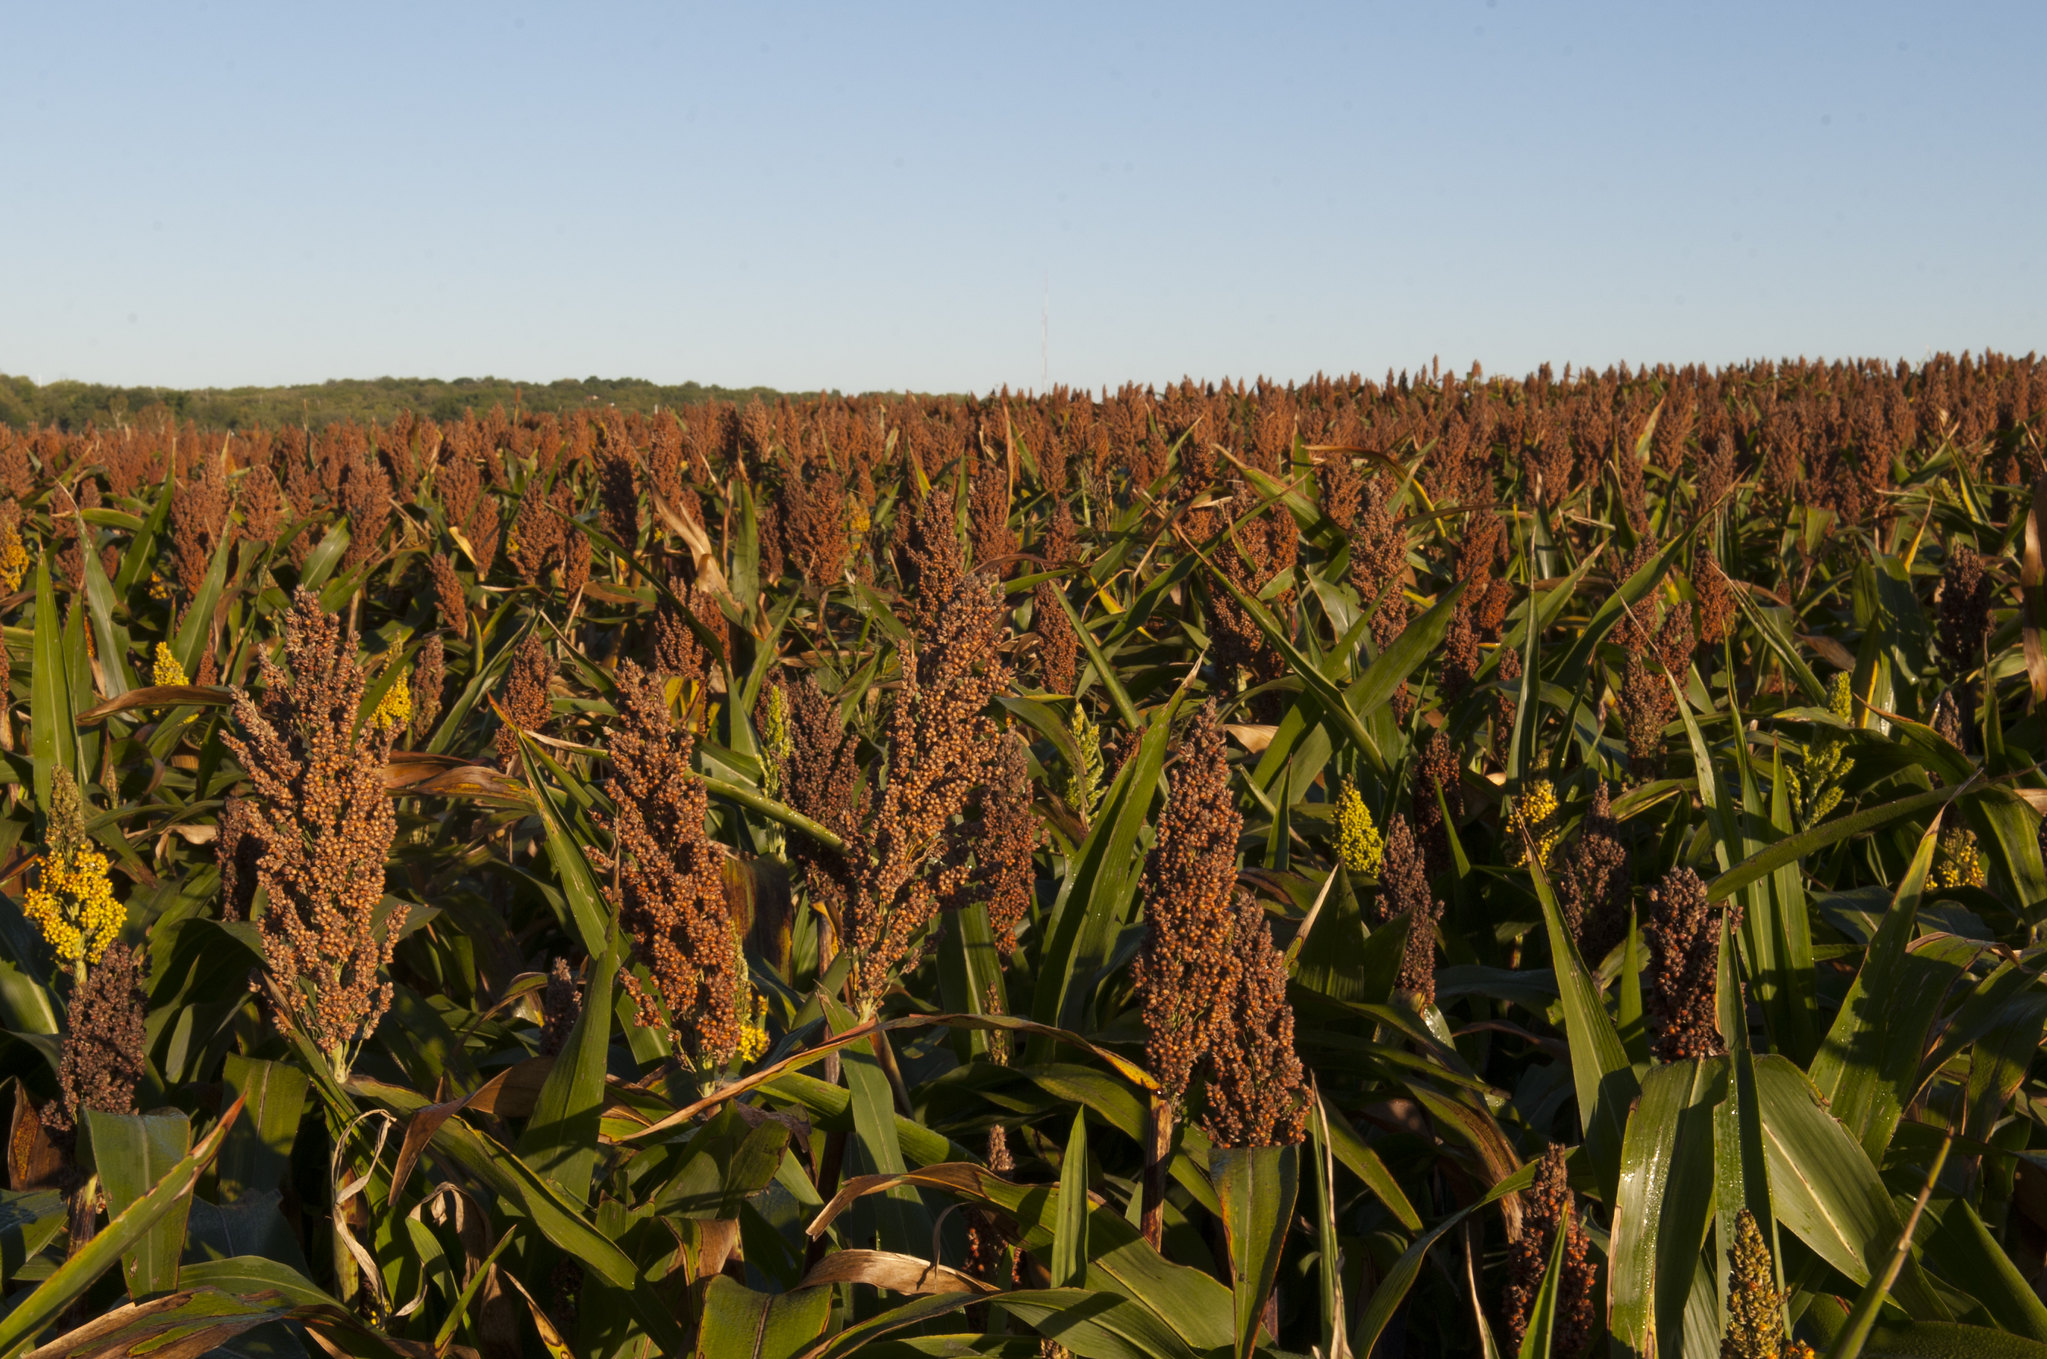 A field of sorghum. Bioenergy sorghum hybrids can restore carbon levels in soil, improve soil fertility, provide biomass for biofuel production, and combat climate change. Credit: K-State Research and Extension; license CC by 2.0